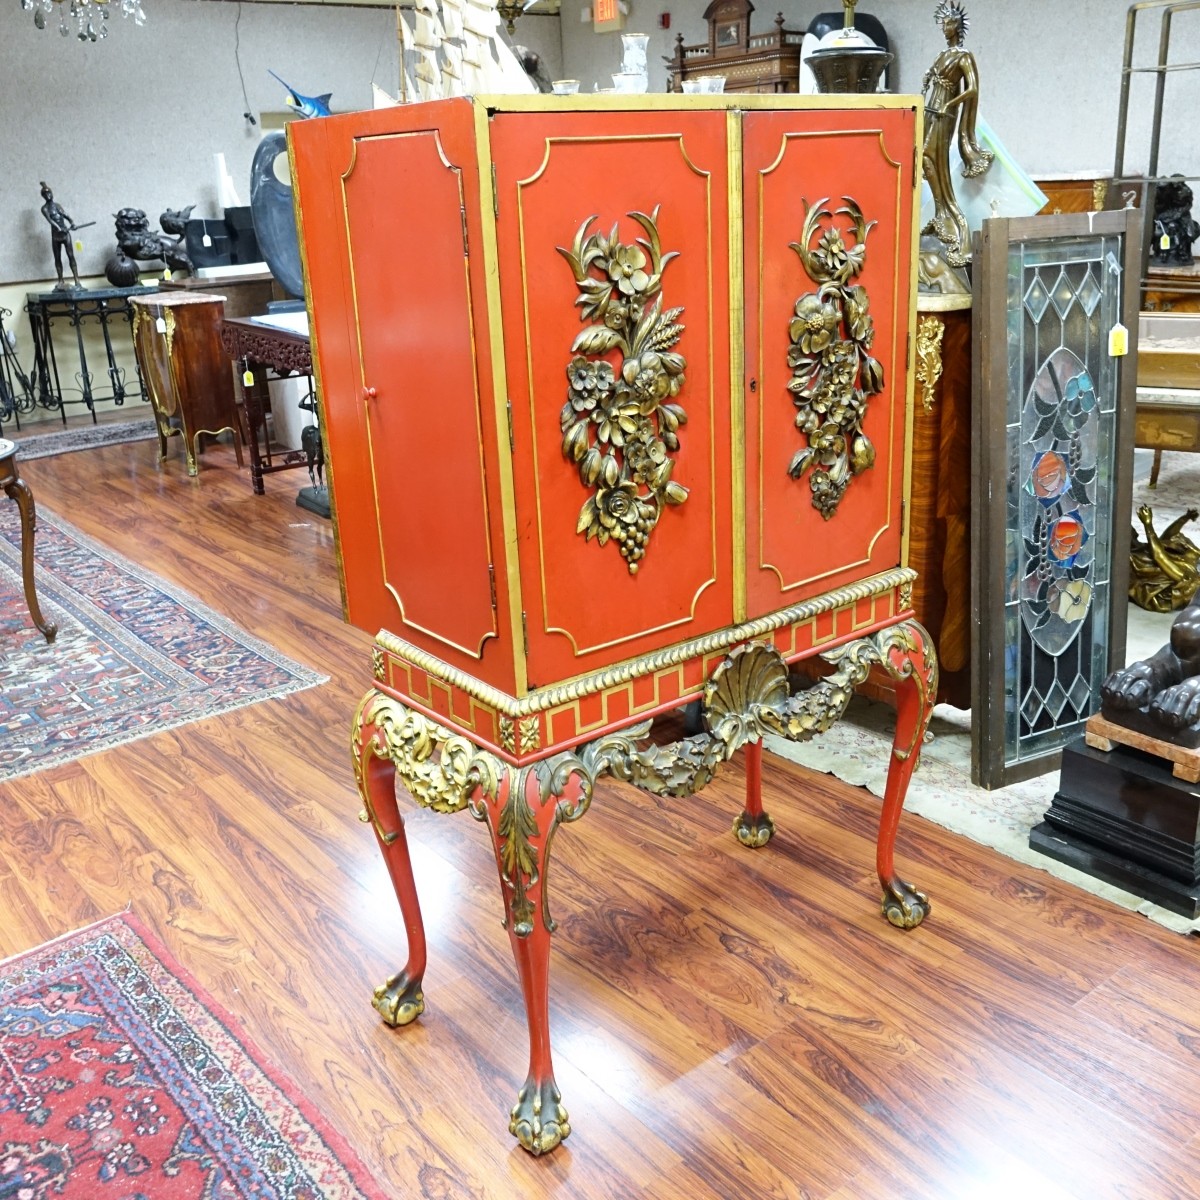 Mid 20th C. Red lacquer and Gilt Painted Cabinet